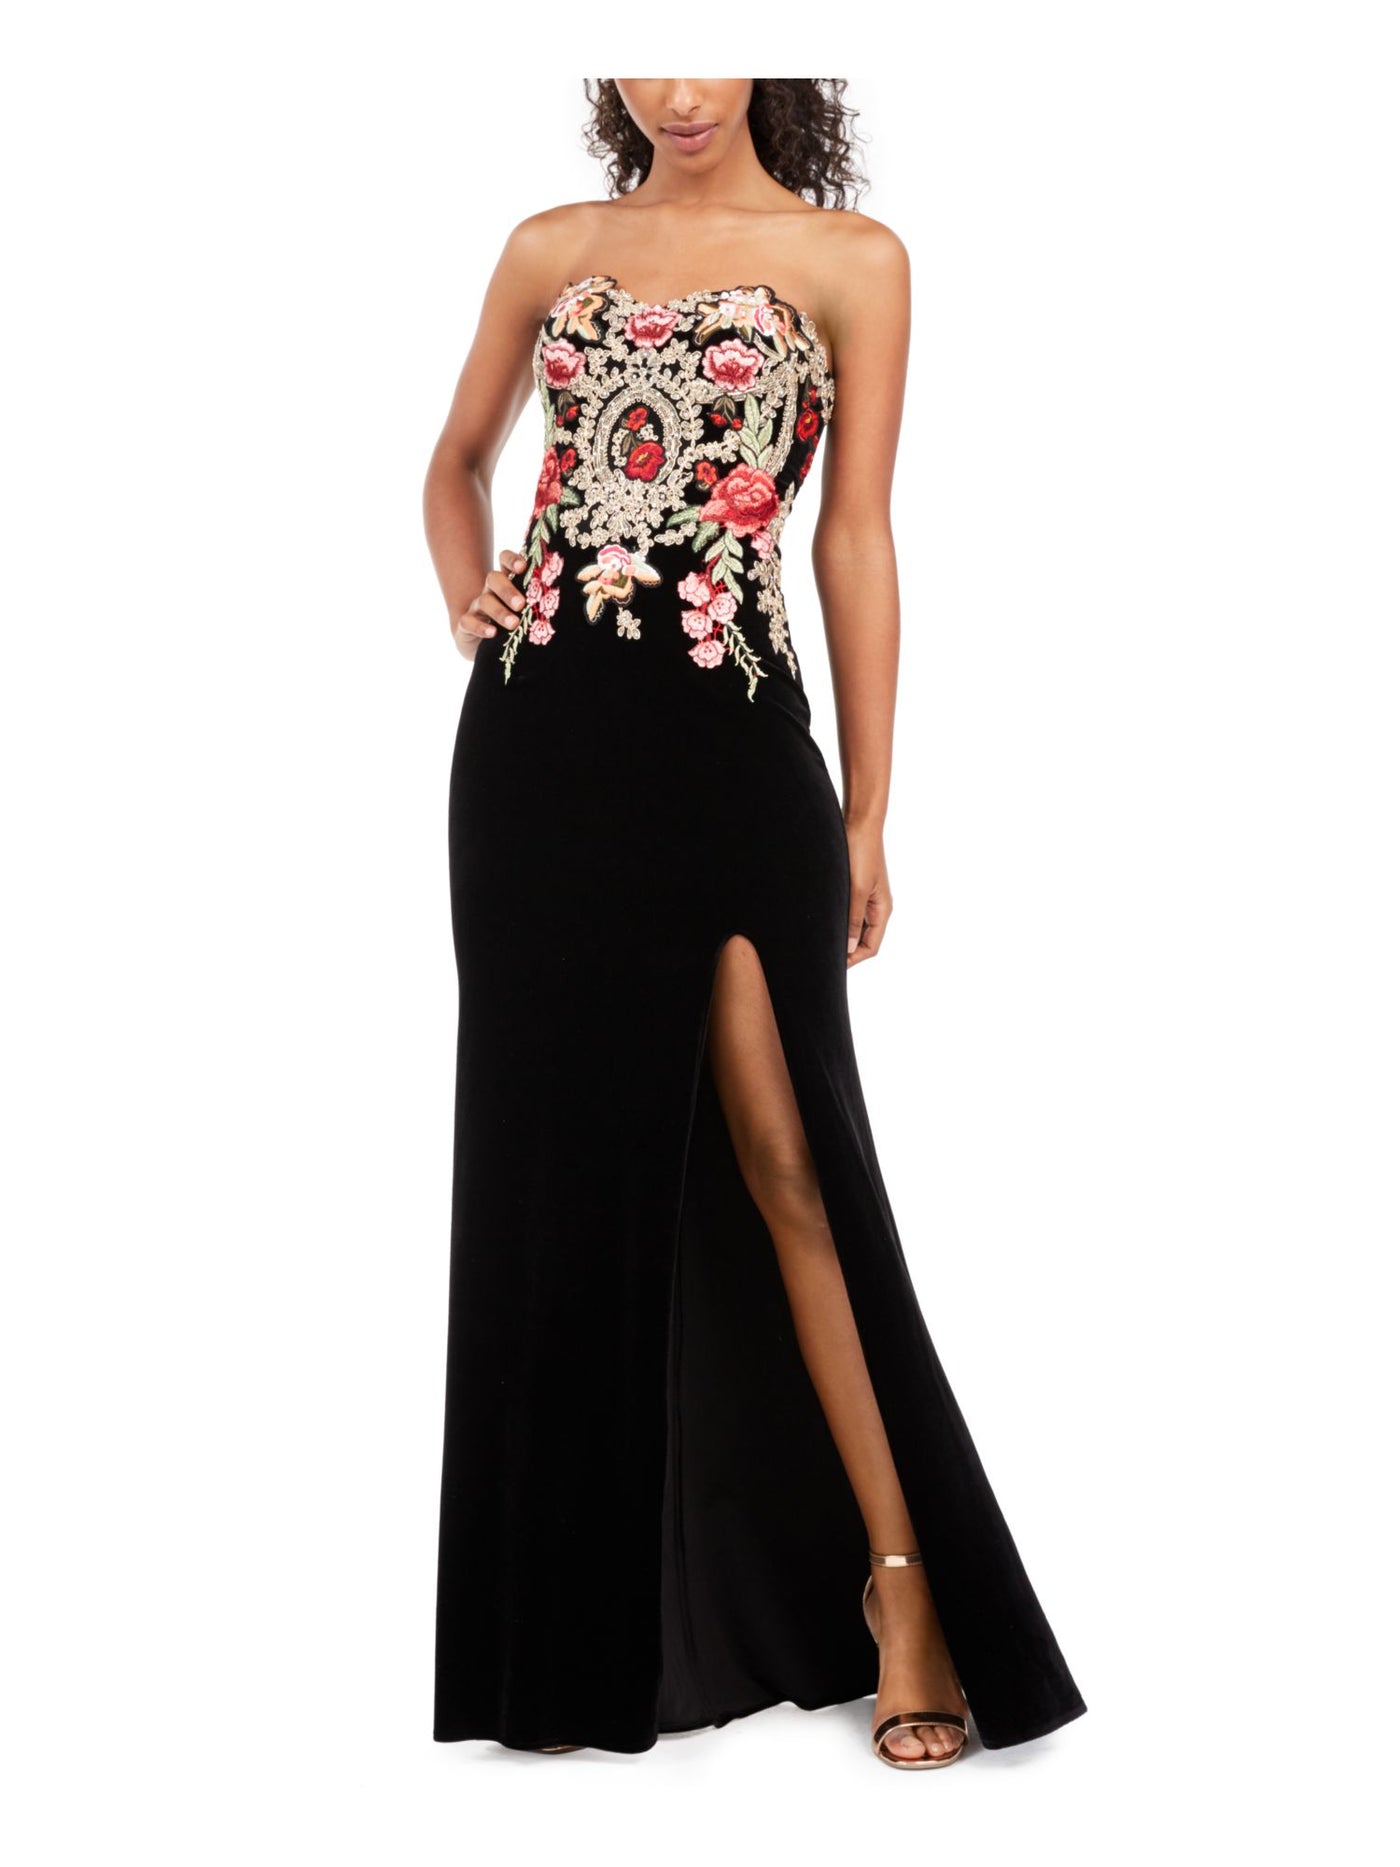 BLONDIE NITES Womens Black Embellished Flowers On The Top Sleeveless Strapless Full-Length Evening Fit + Flare Dress Juniors 1